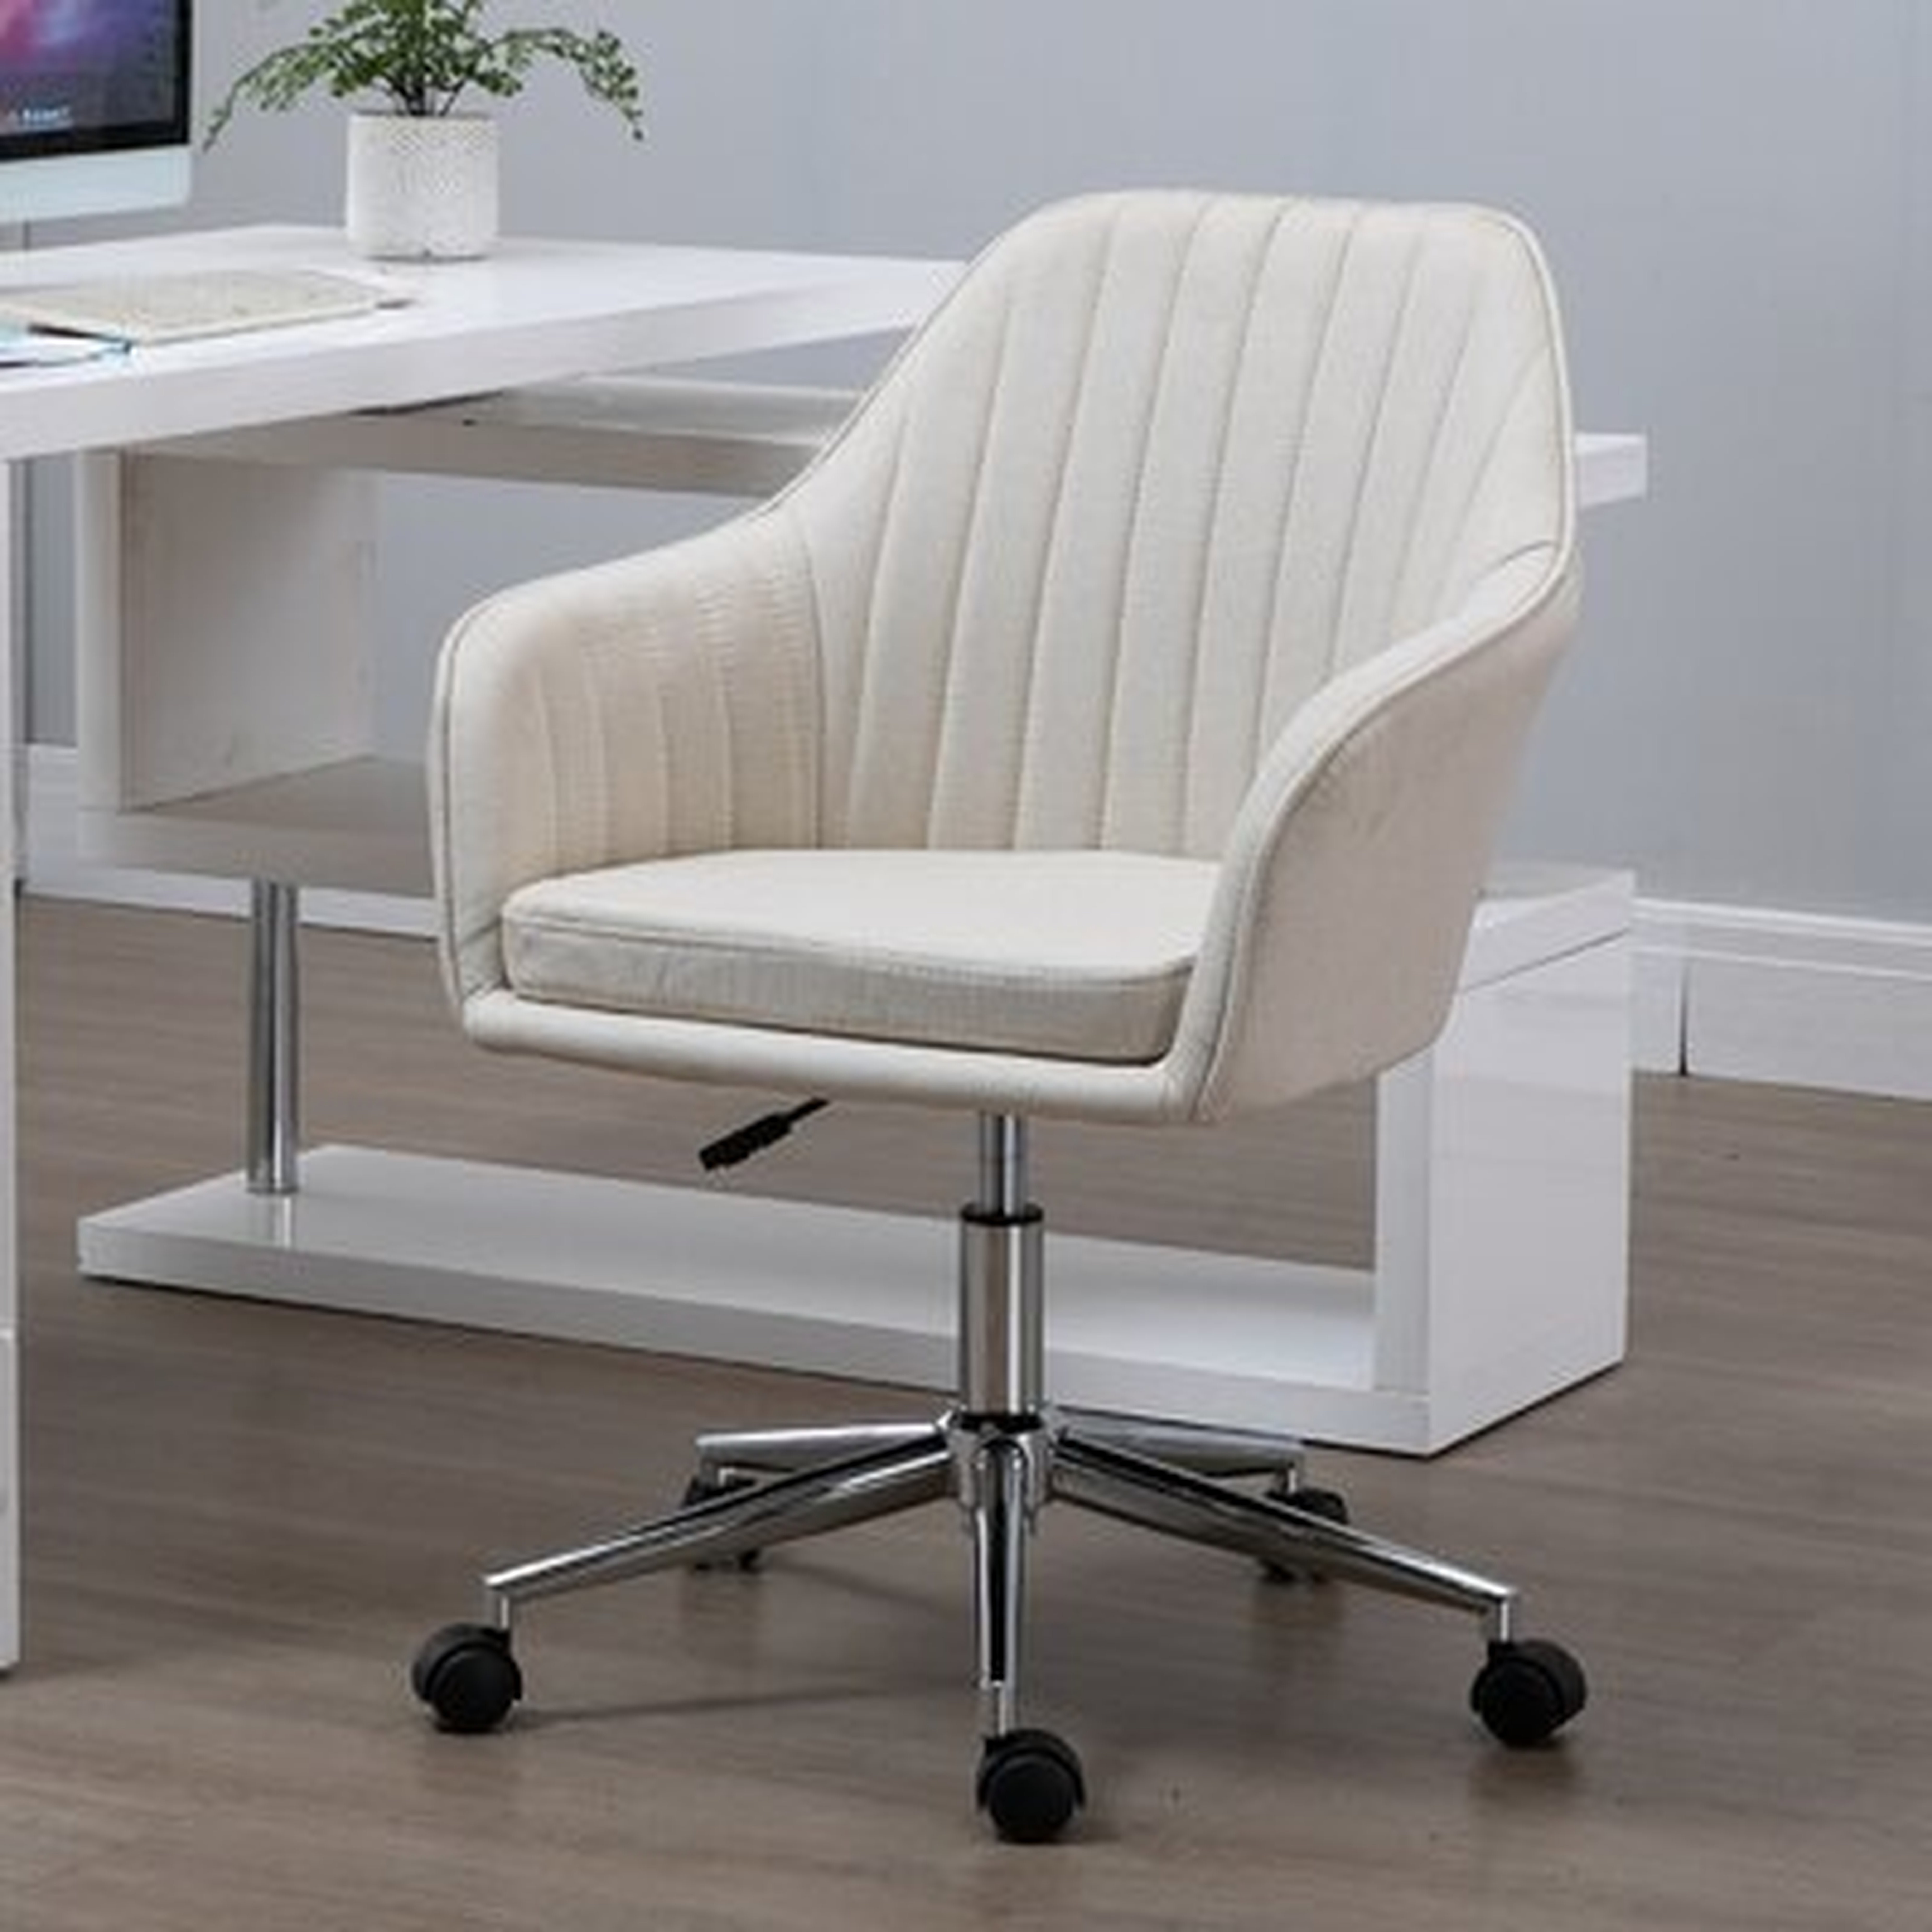 Office Computer Chair Mid-Back Task Chair With Tub Shape Design, Lined Pattern Back And Swivel Wheels For Living Room, Grey - Wayfair